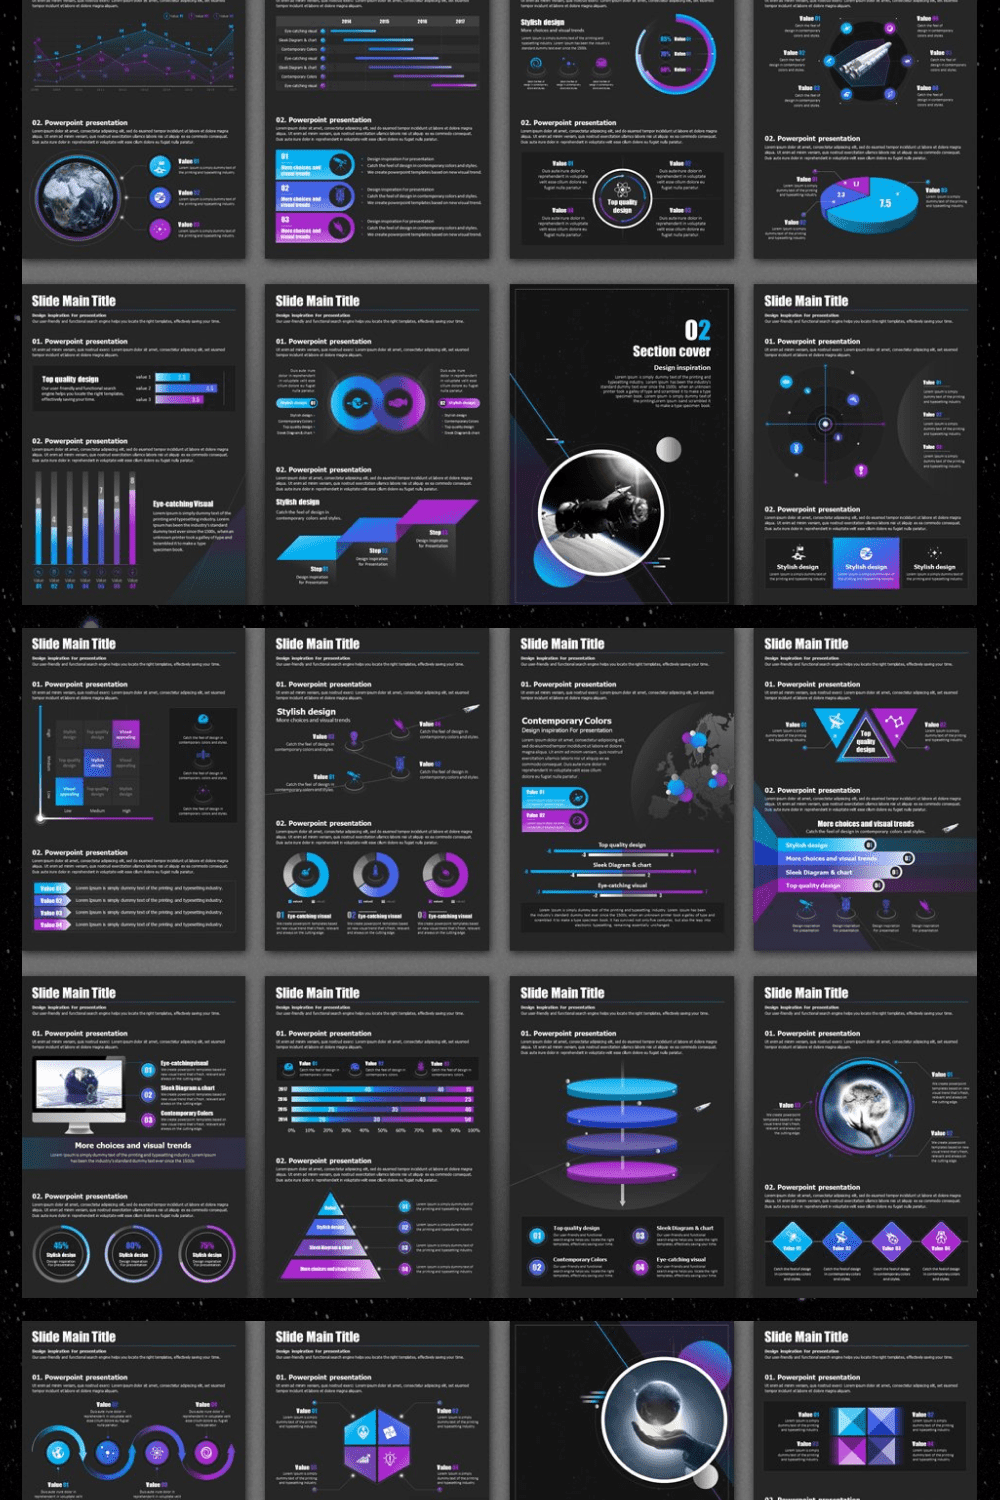 space travel vertical powerpoint pinterest image.